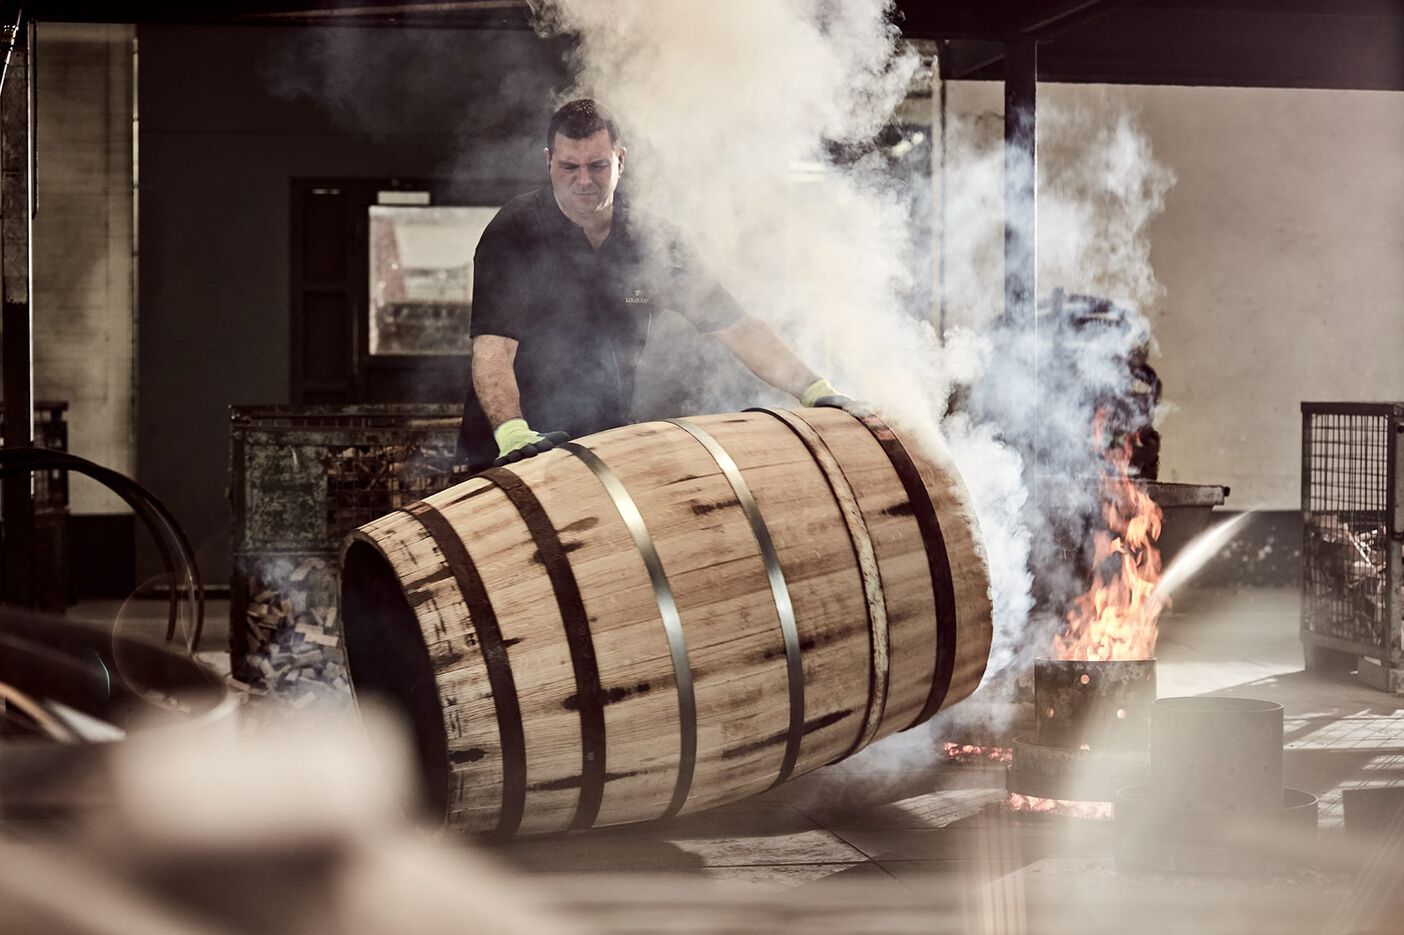 A photo of a man in black tshirt preparing a new LOUIS XIII barrel, fire and smoke